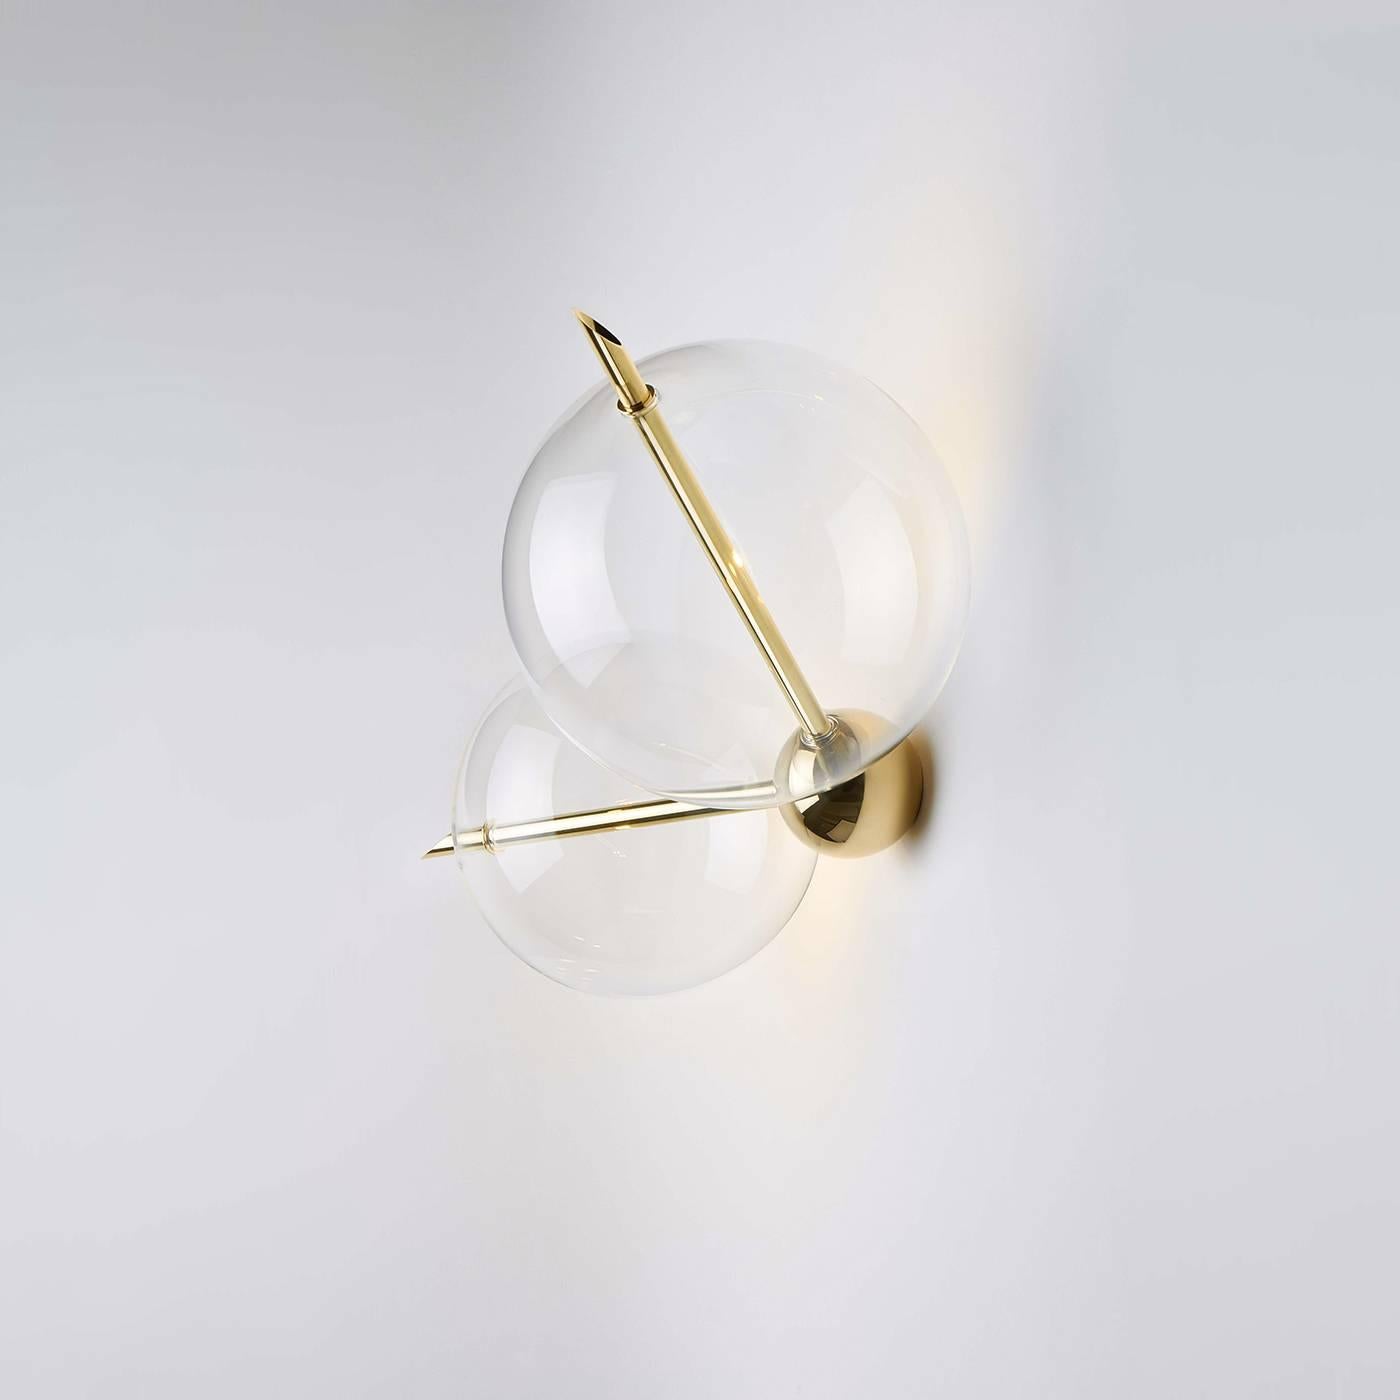 This exquisite two-light sconce can be displayed alone, or paired with a twin to illuminate the sides of a bed or of a mirror, or it can be used among others from the same 'Lune' collection, inspired by planets and their satellites. The brass